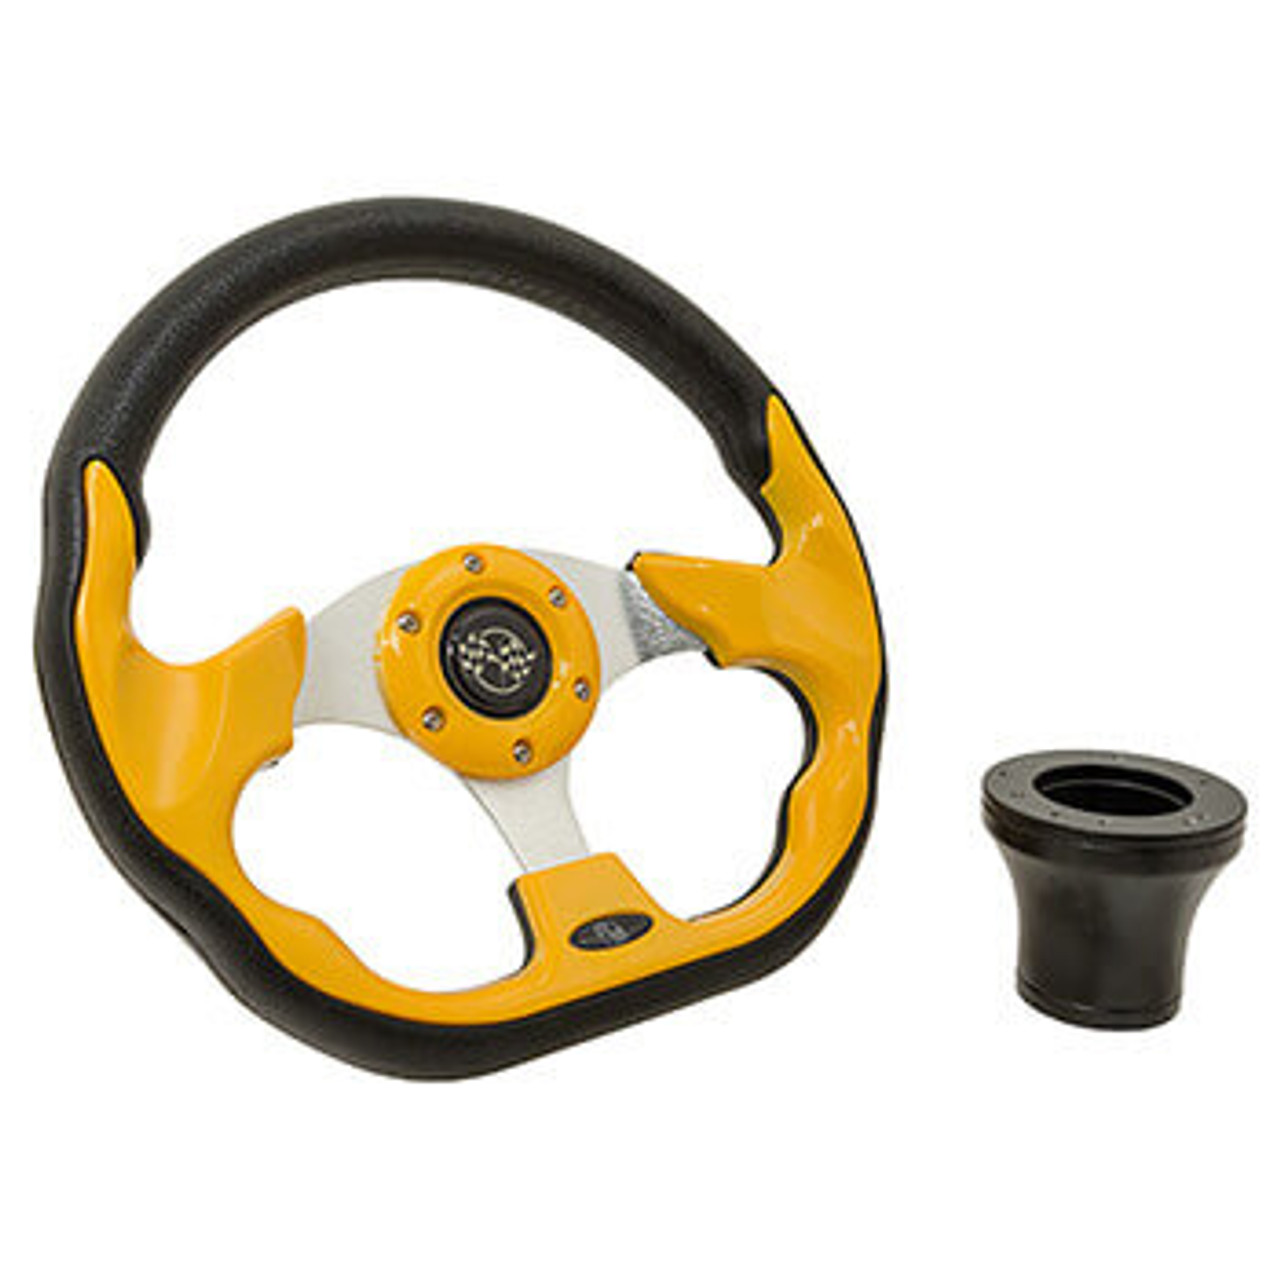 Club Car DS Yellow Racer Steering Wheel Kit for 1982-Up Golf Cart, 06-102